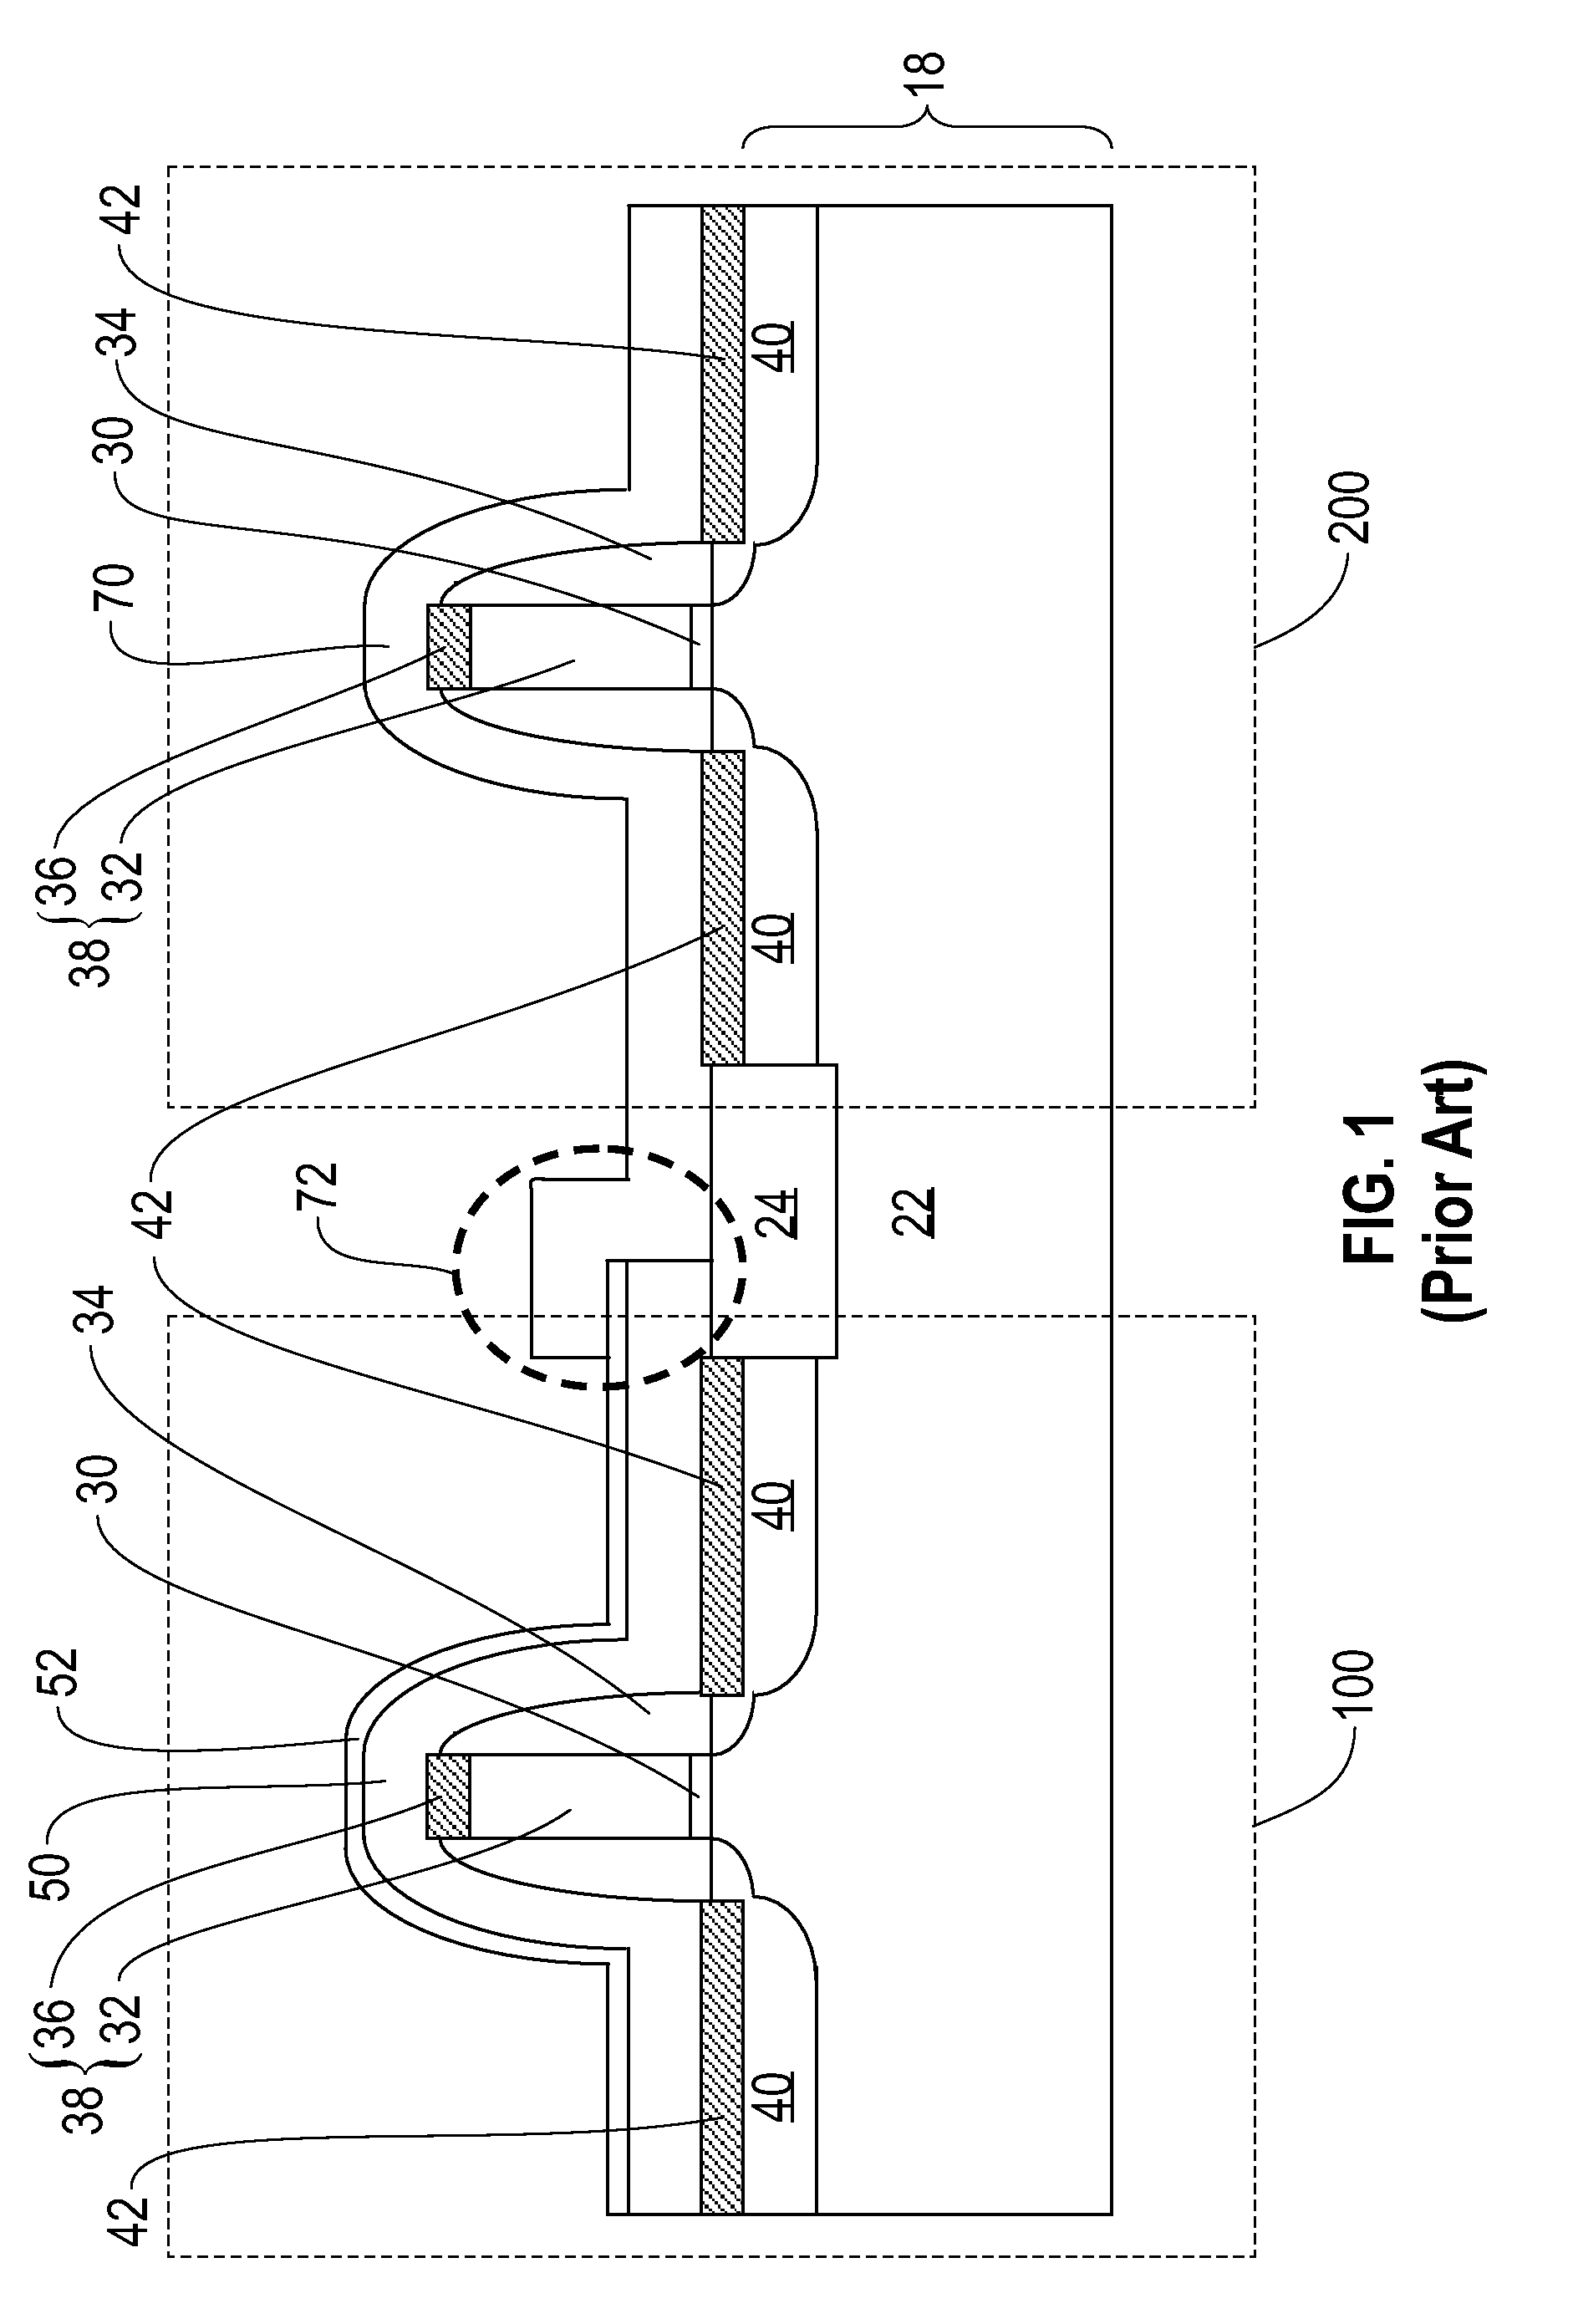 Orientation-optimized pfets in CMOS devices employing dual stress liners